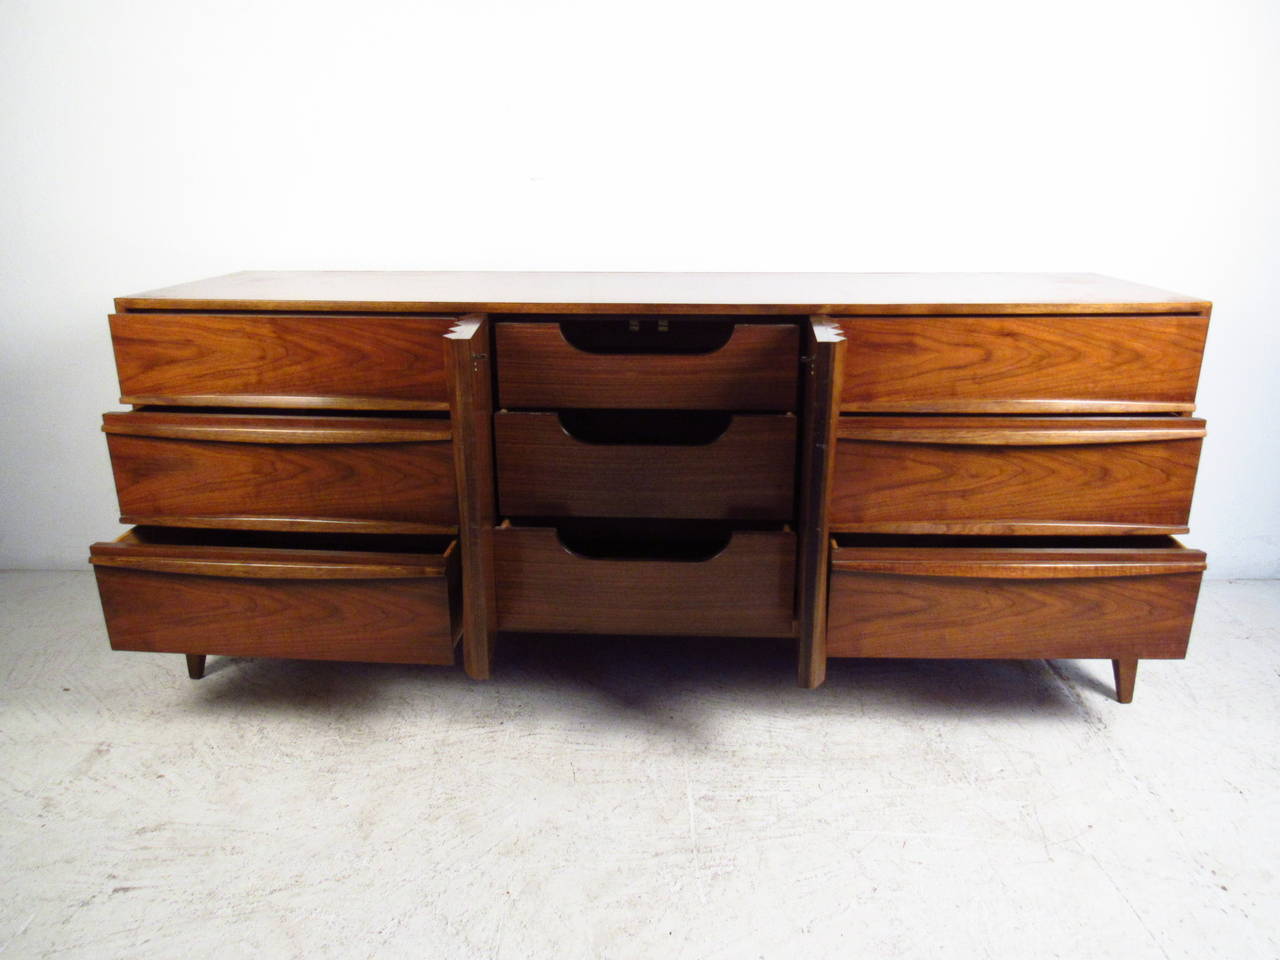 The beautiful lines on this vintage dresser perfectly compliment the wonderful walnut finish. Tapered legs and plenty of storage space make this the perfect piece for any interior. Please confirm item location (NY or NJ).